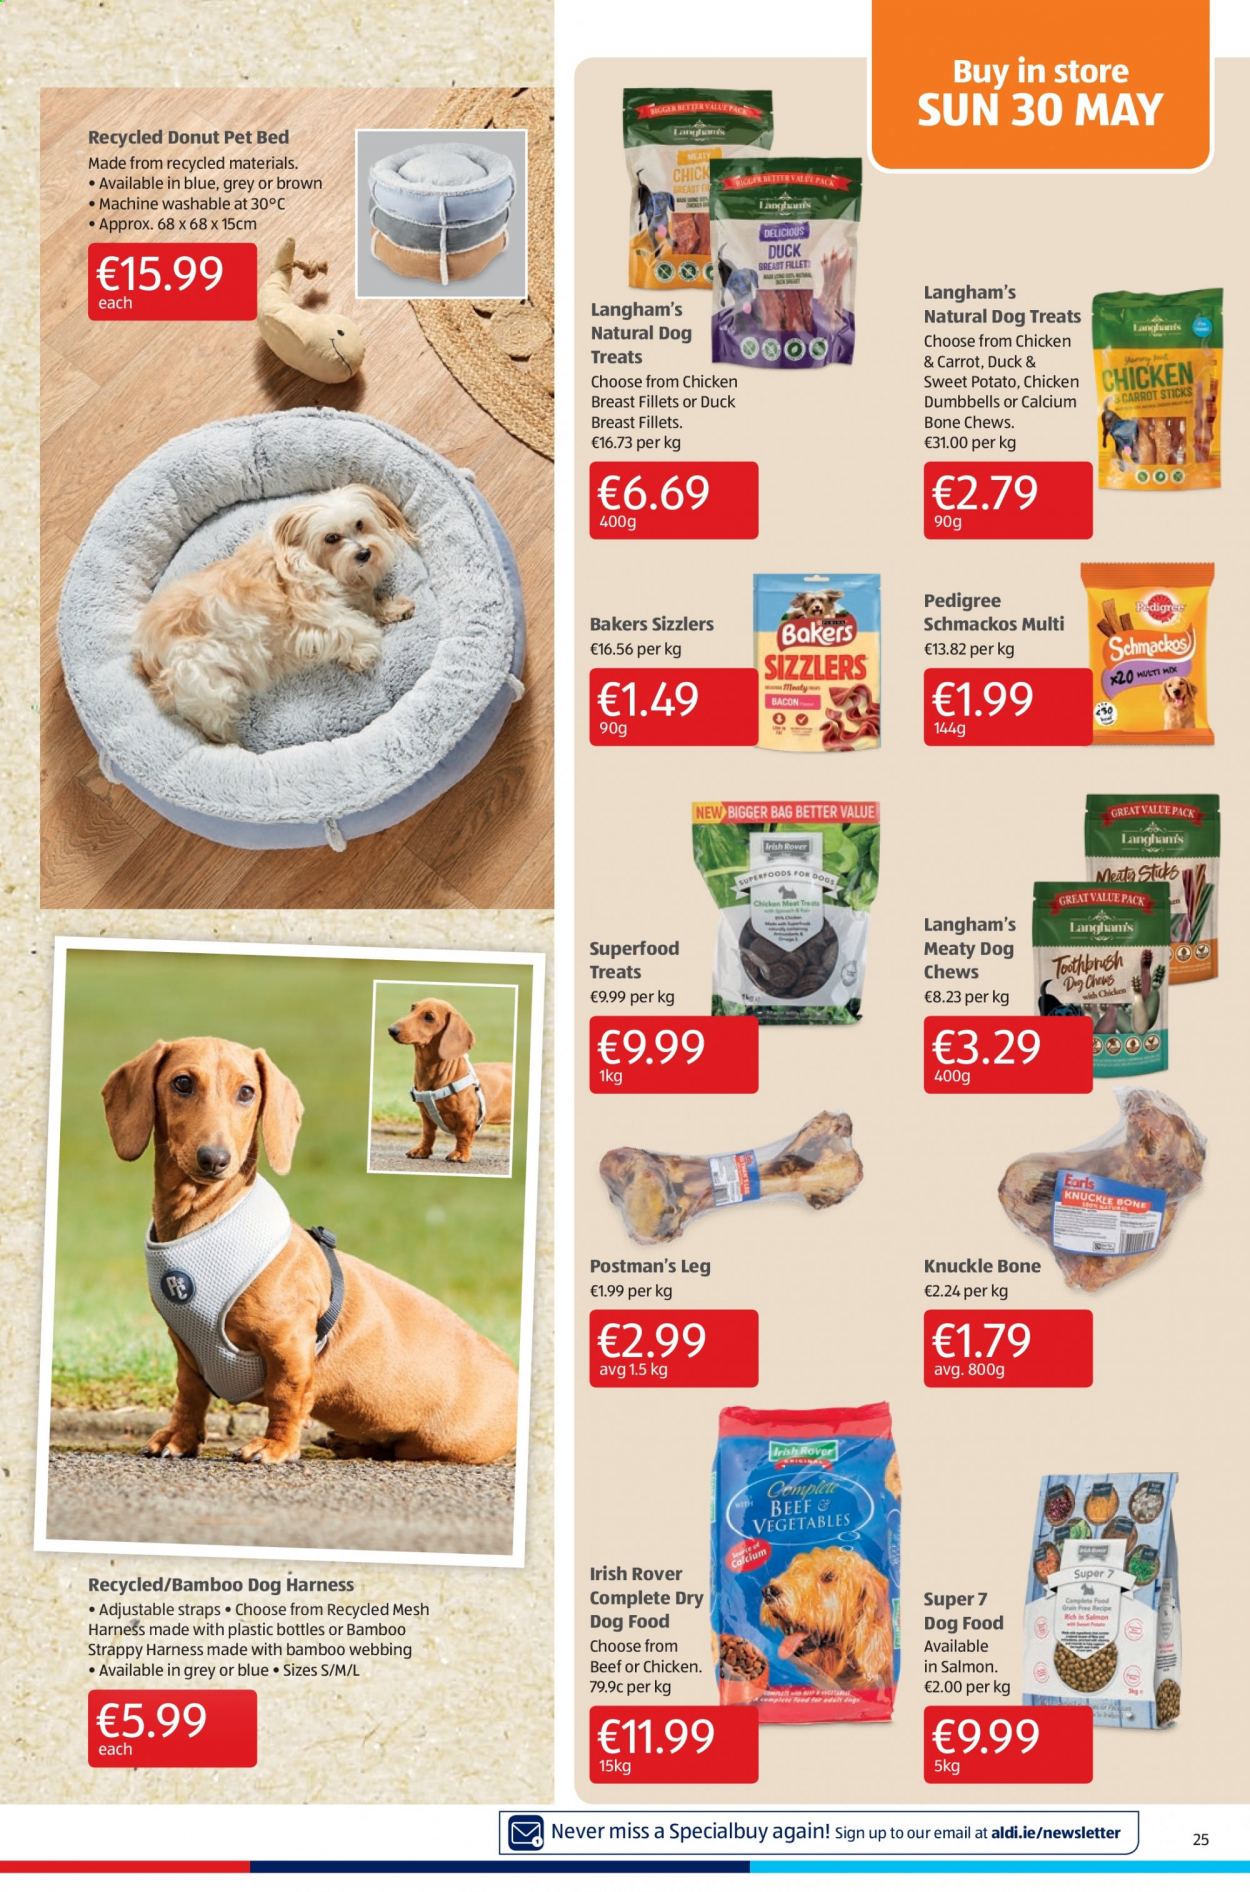 thumbnail - Aldi offer  - 27.05.2021 - 02.06.2021 - Sales products - sweet potato, chicken breasts, duck meat, duck breasts, pet bed, dog harness, animal food, animal treats, dog food, Pedigree, postman's leg, knuckle bone, Schmackos, Bakers, dry dog food, dog chews, calcium. Page 25.